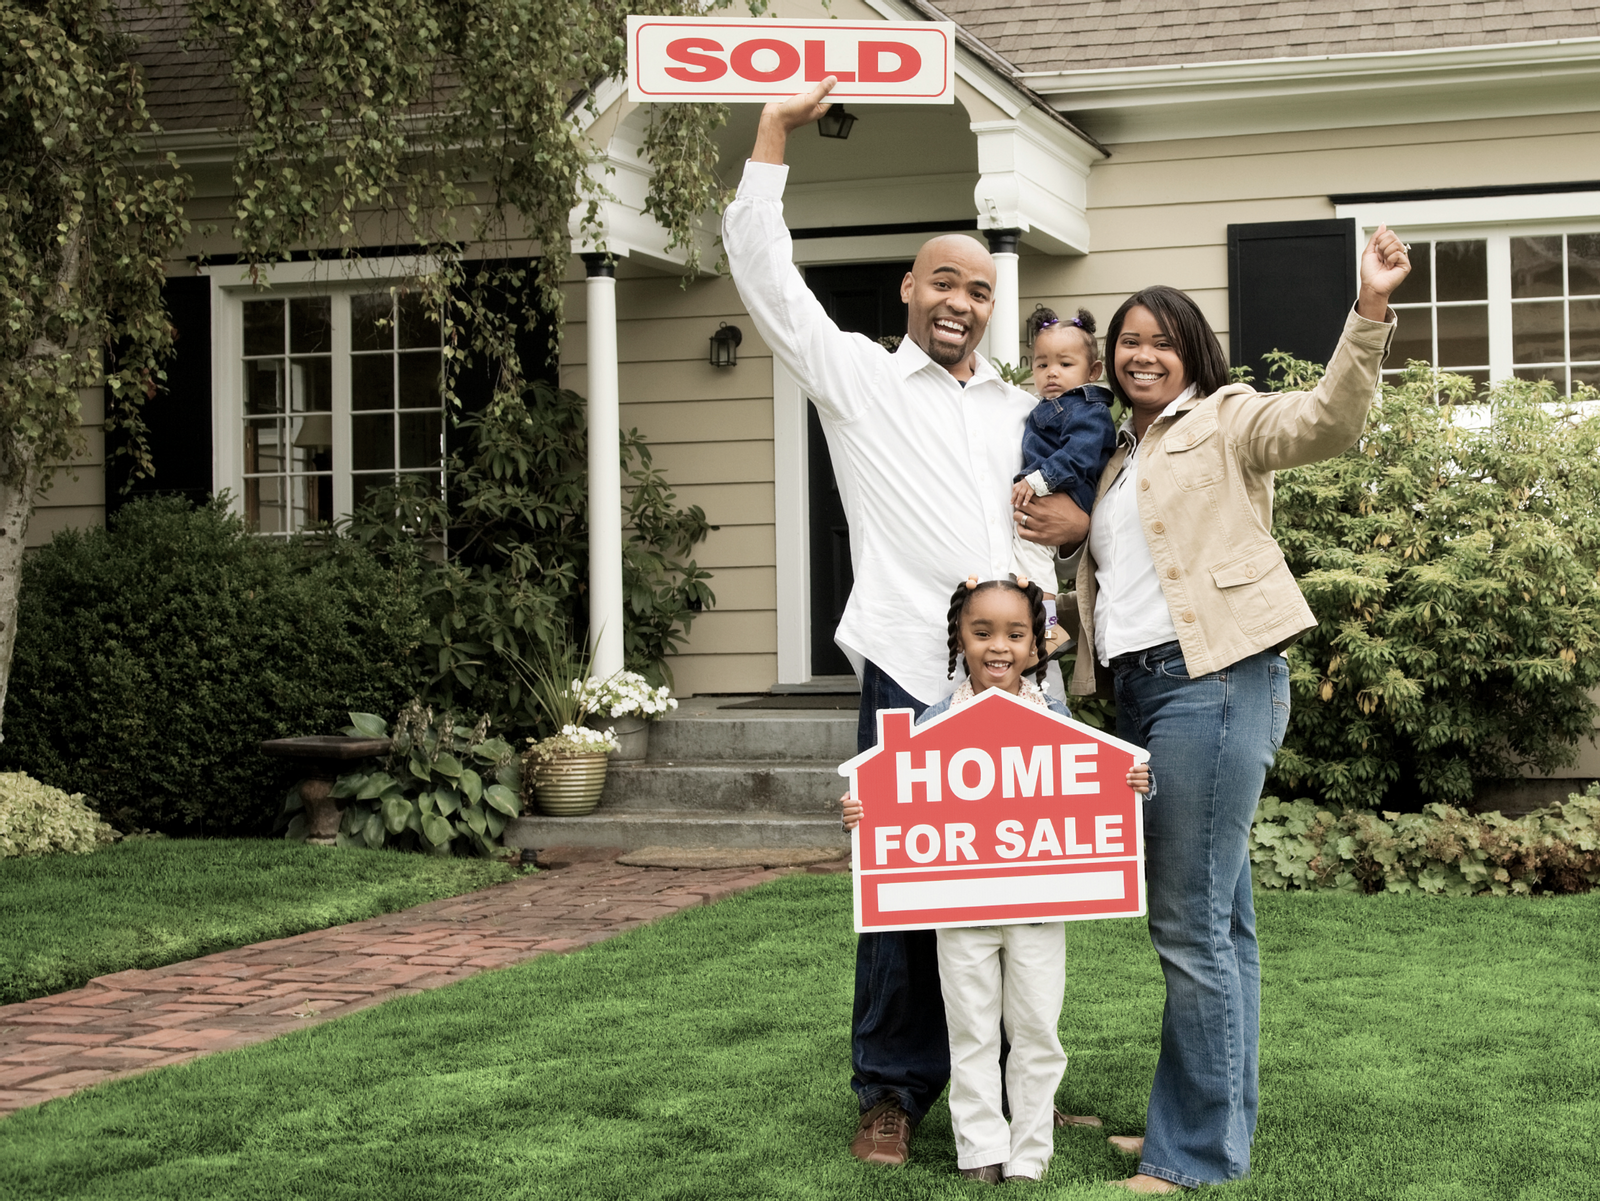 Serious About Selling? 5 Steps to Make Your Home the Best on the Block